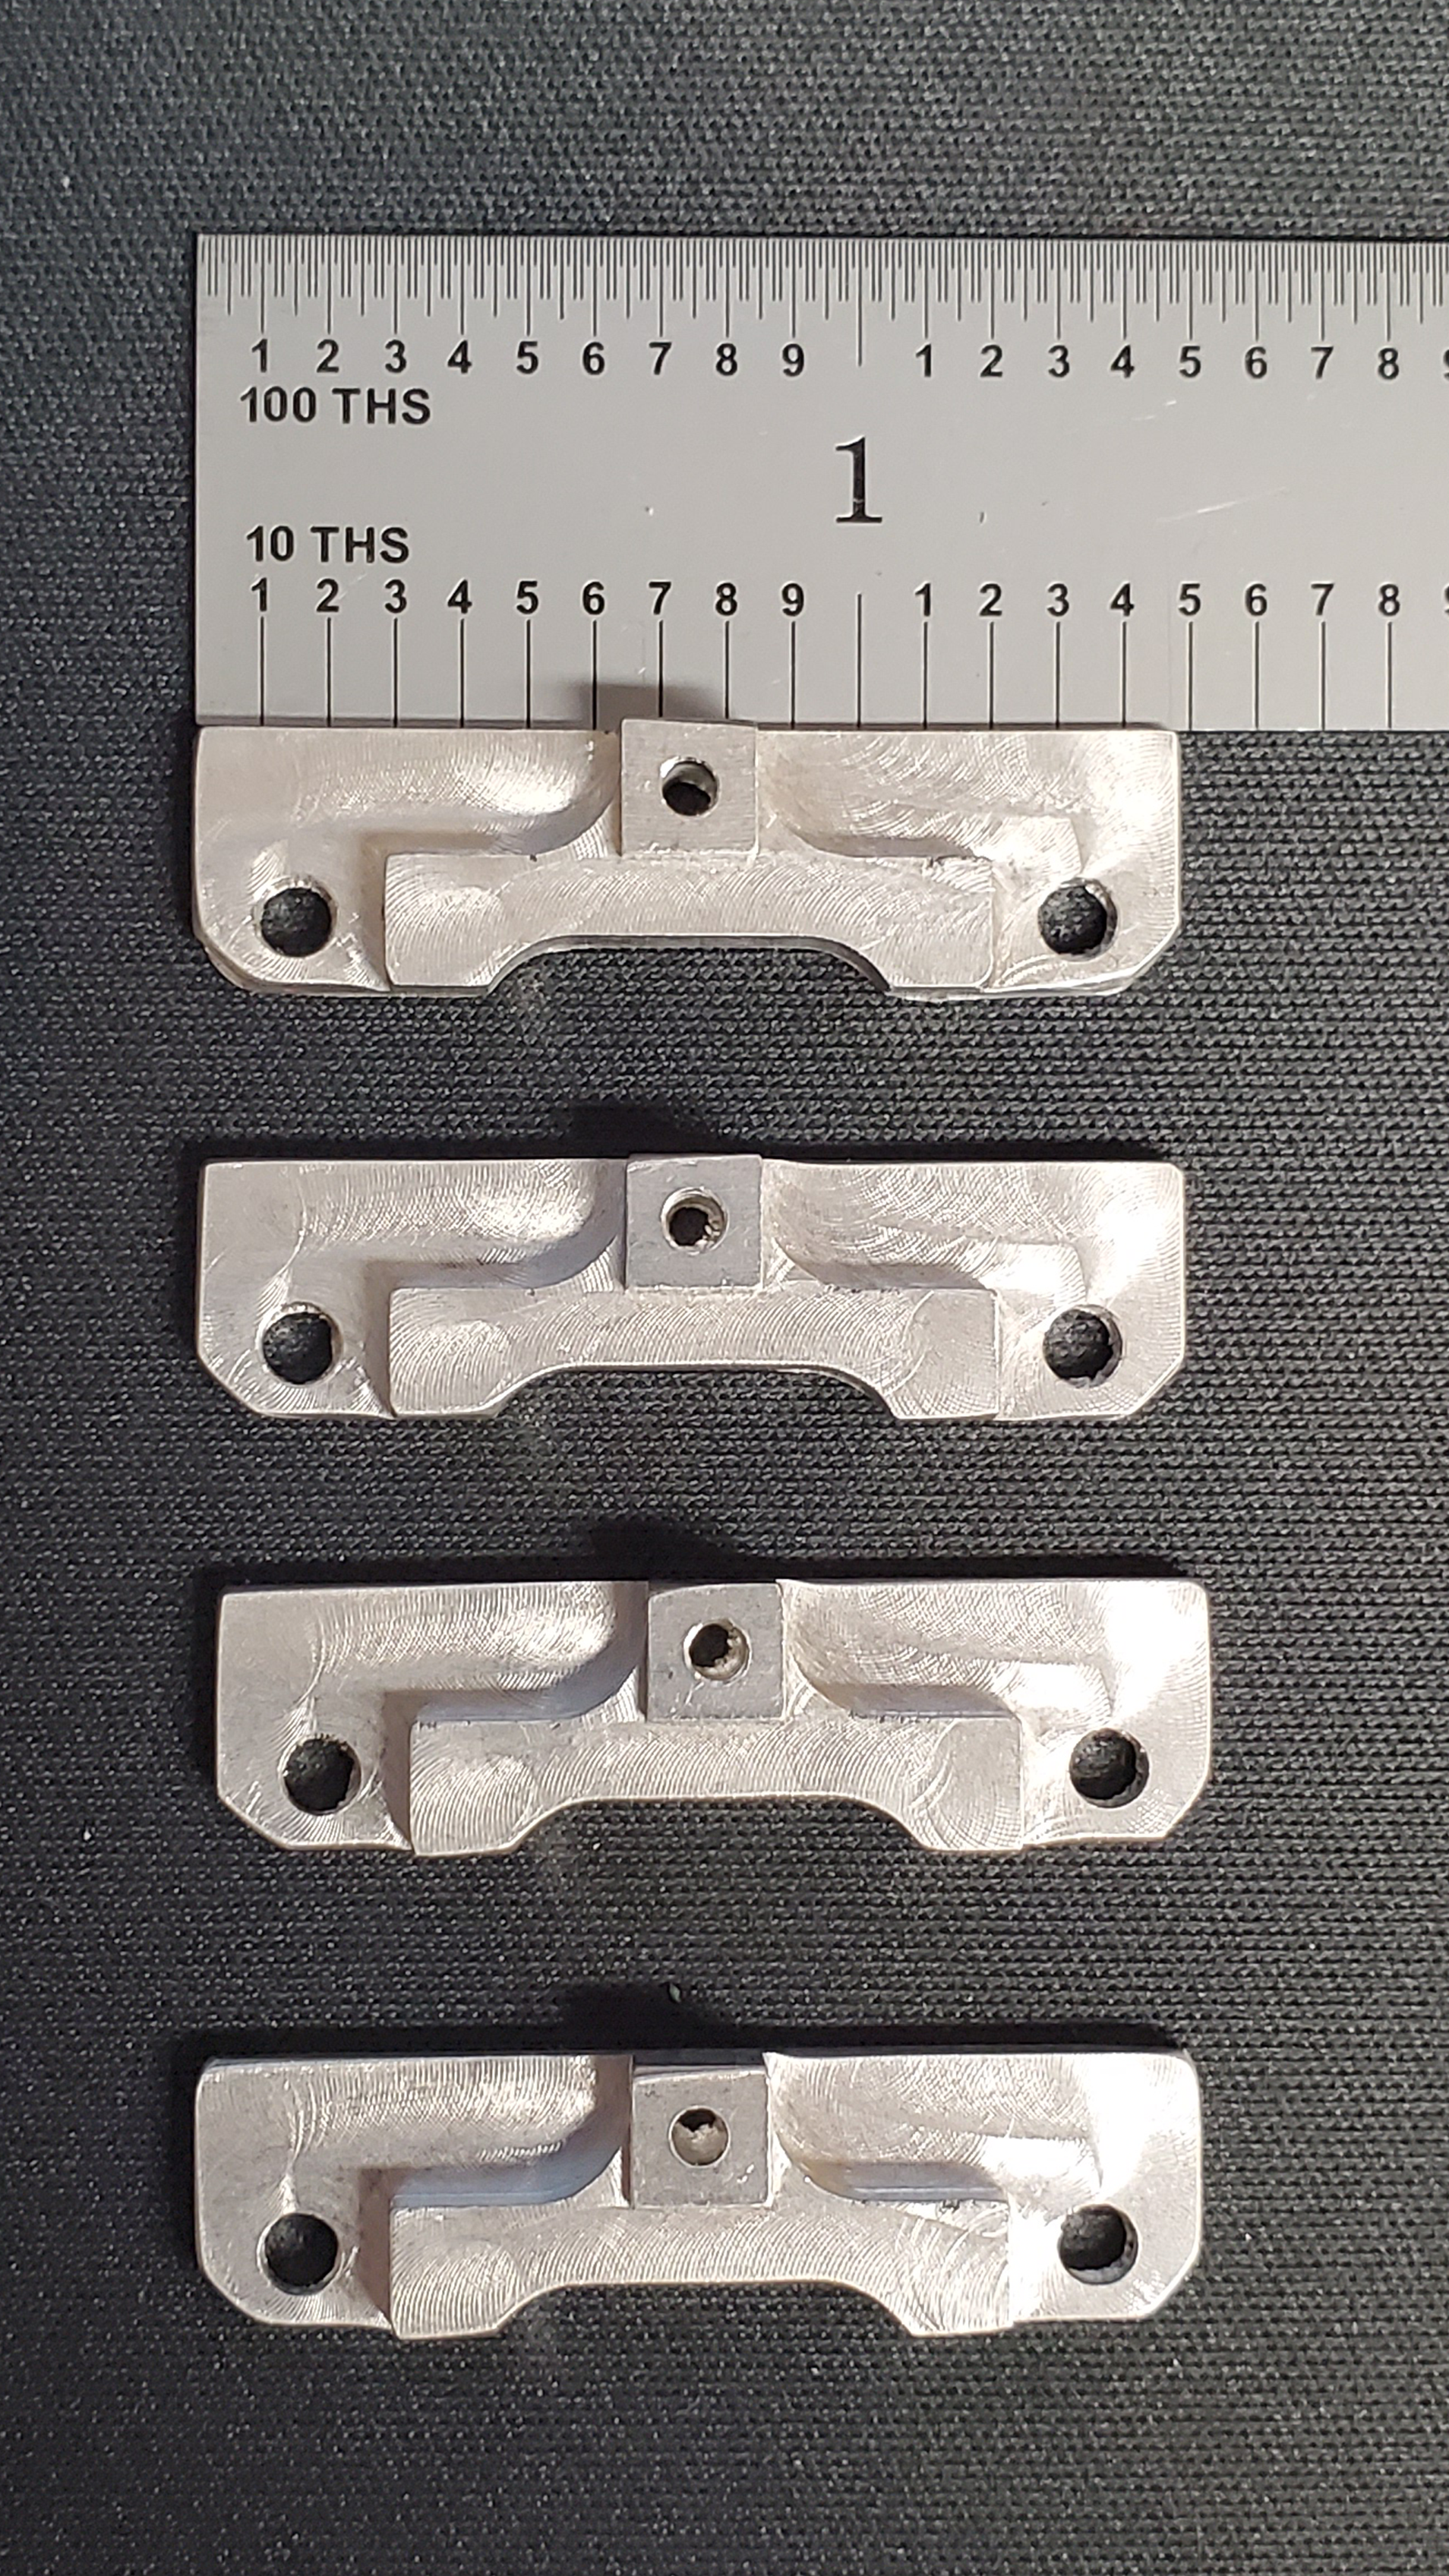 Small parts for cube satellite